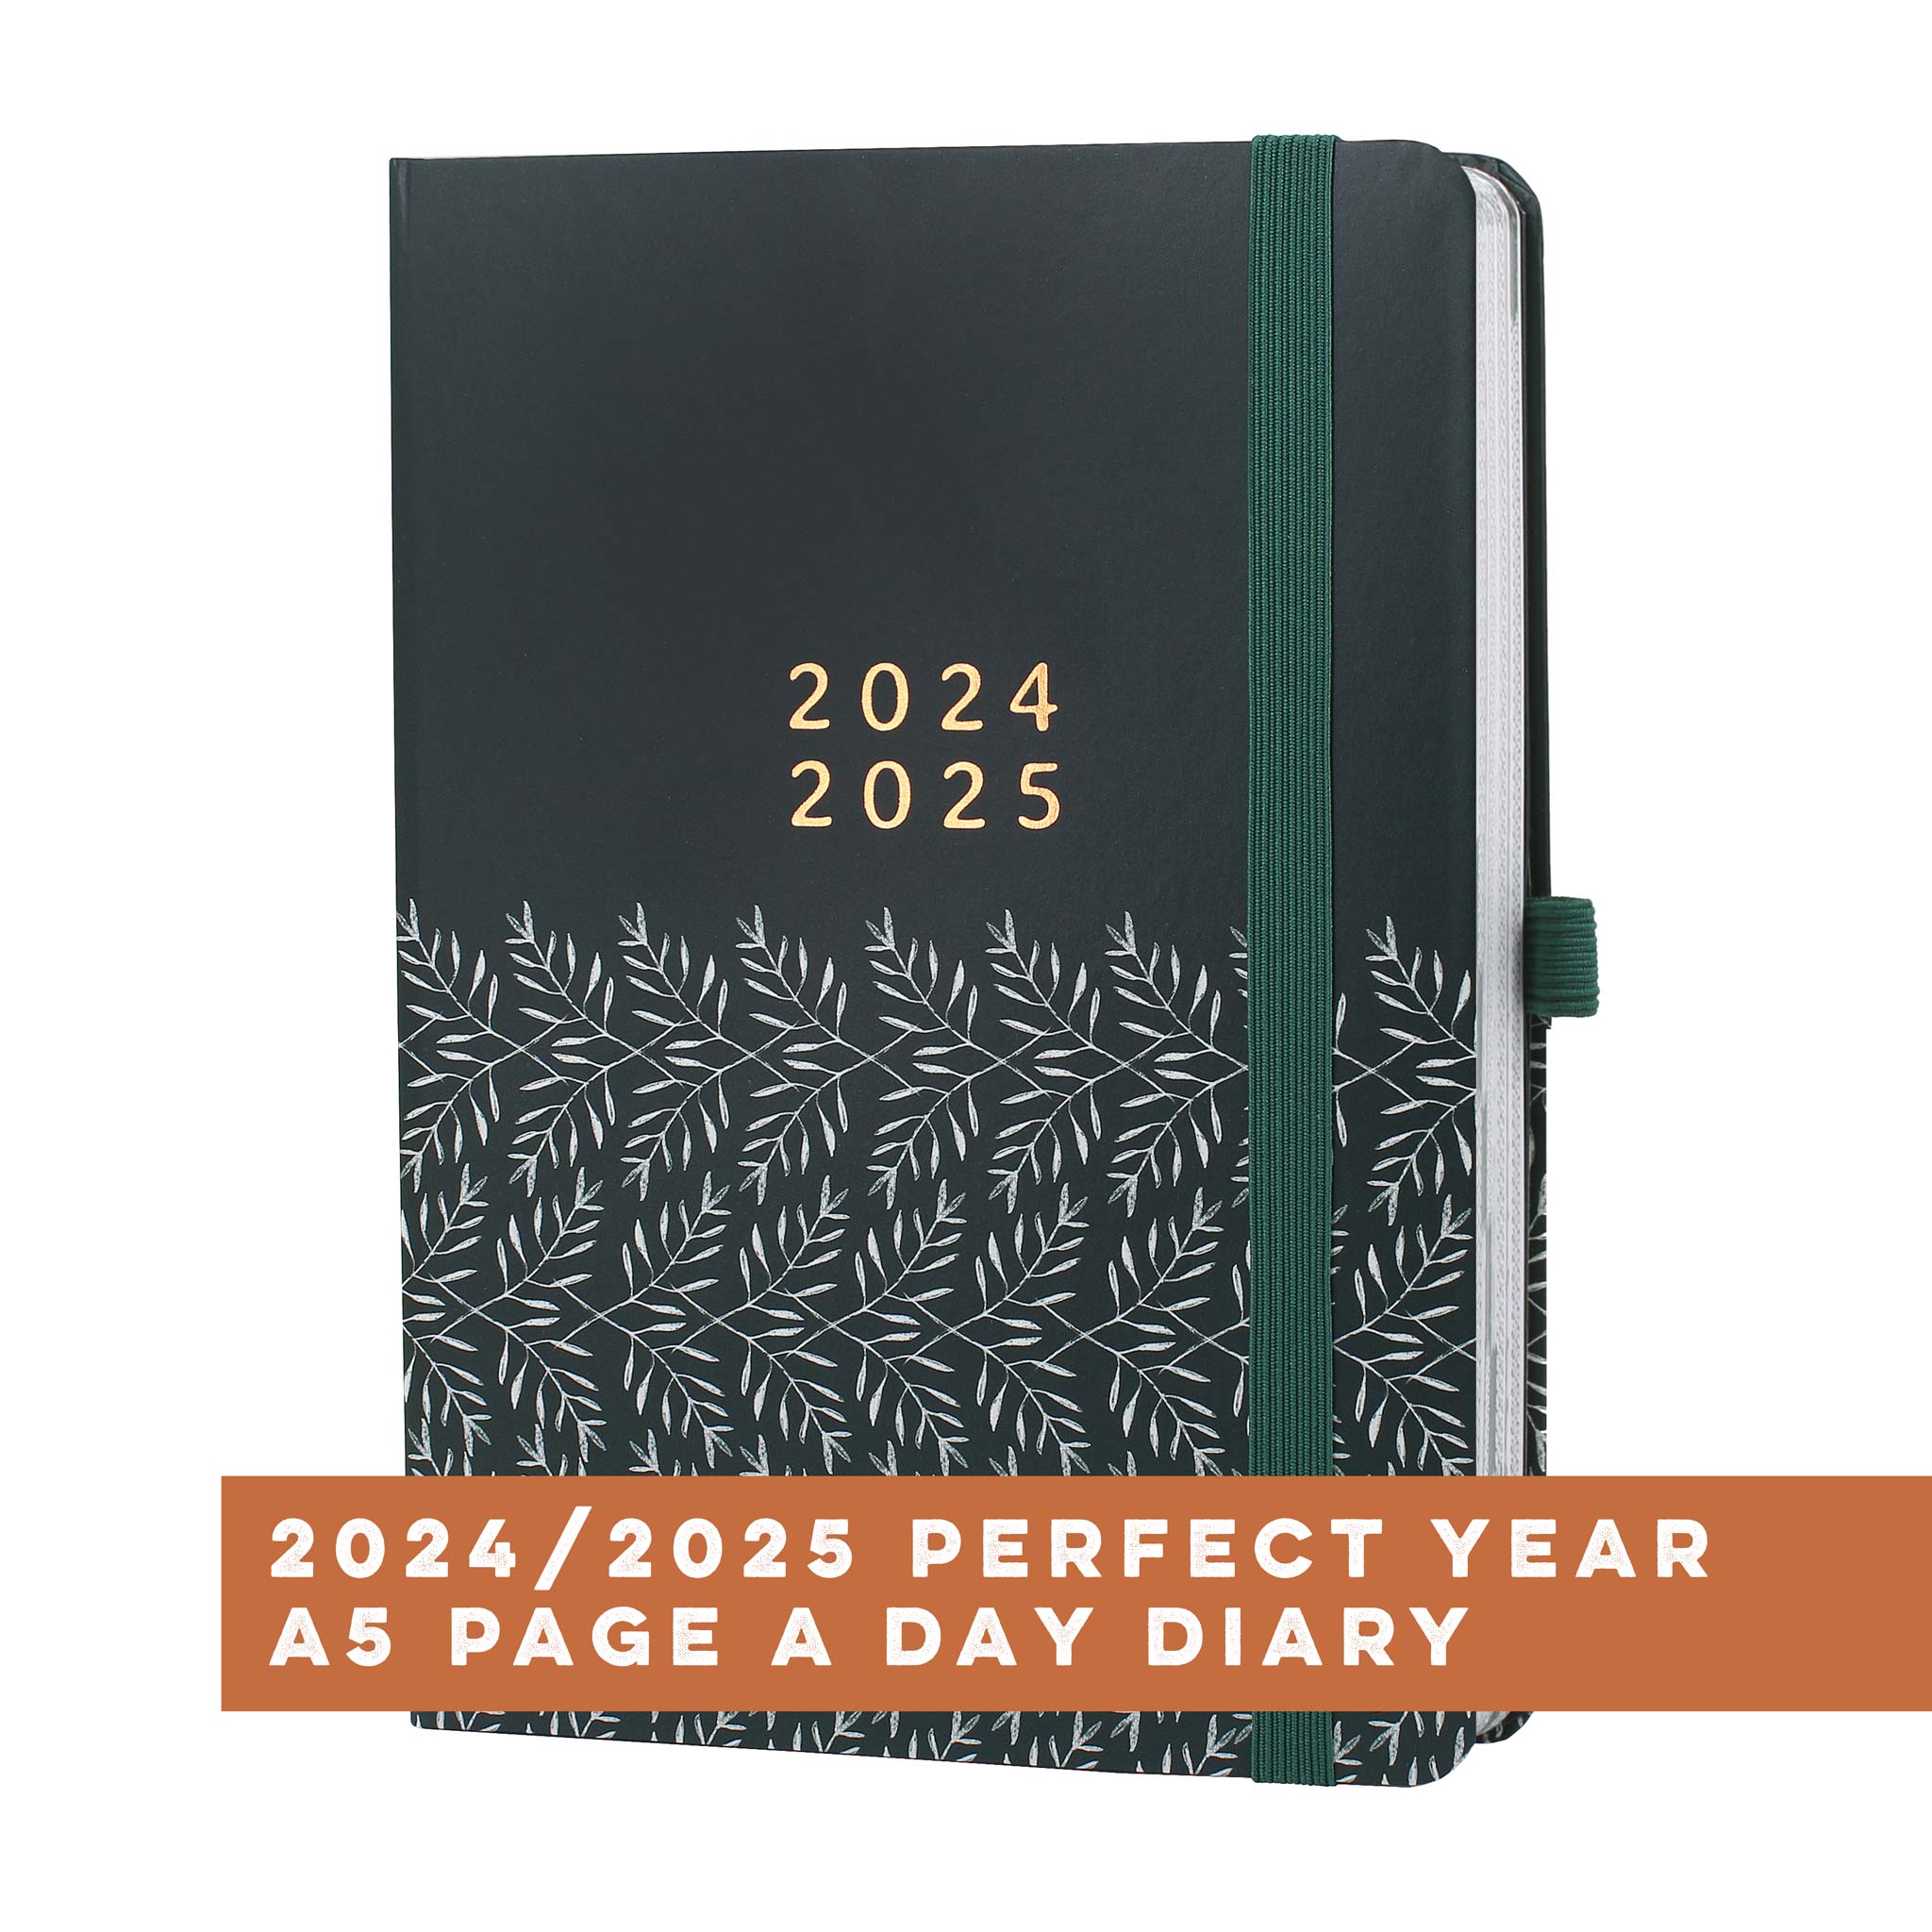 An image of Perfect Year Academic A5 Page A Day Diary 2024 2025